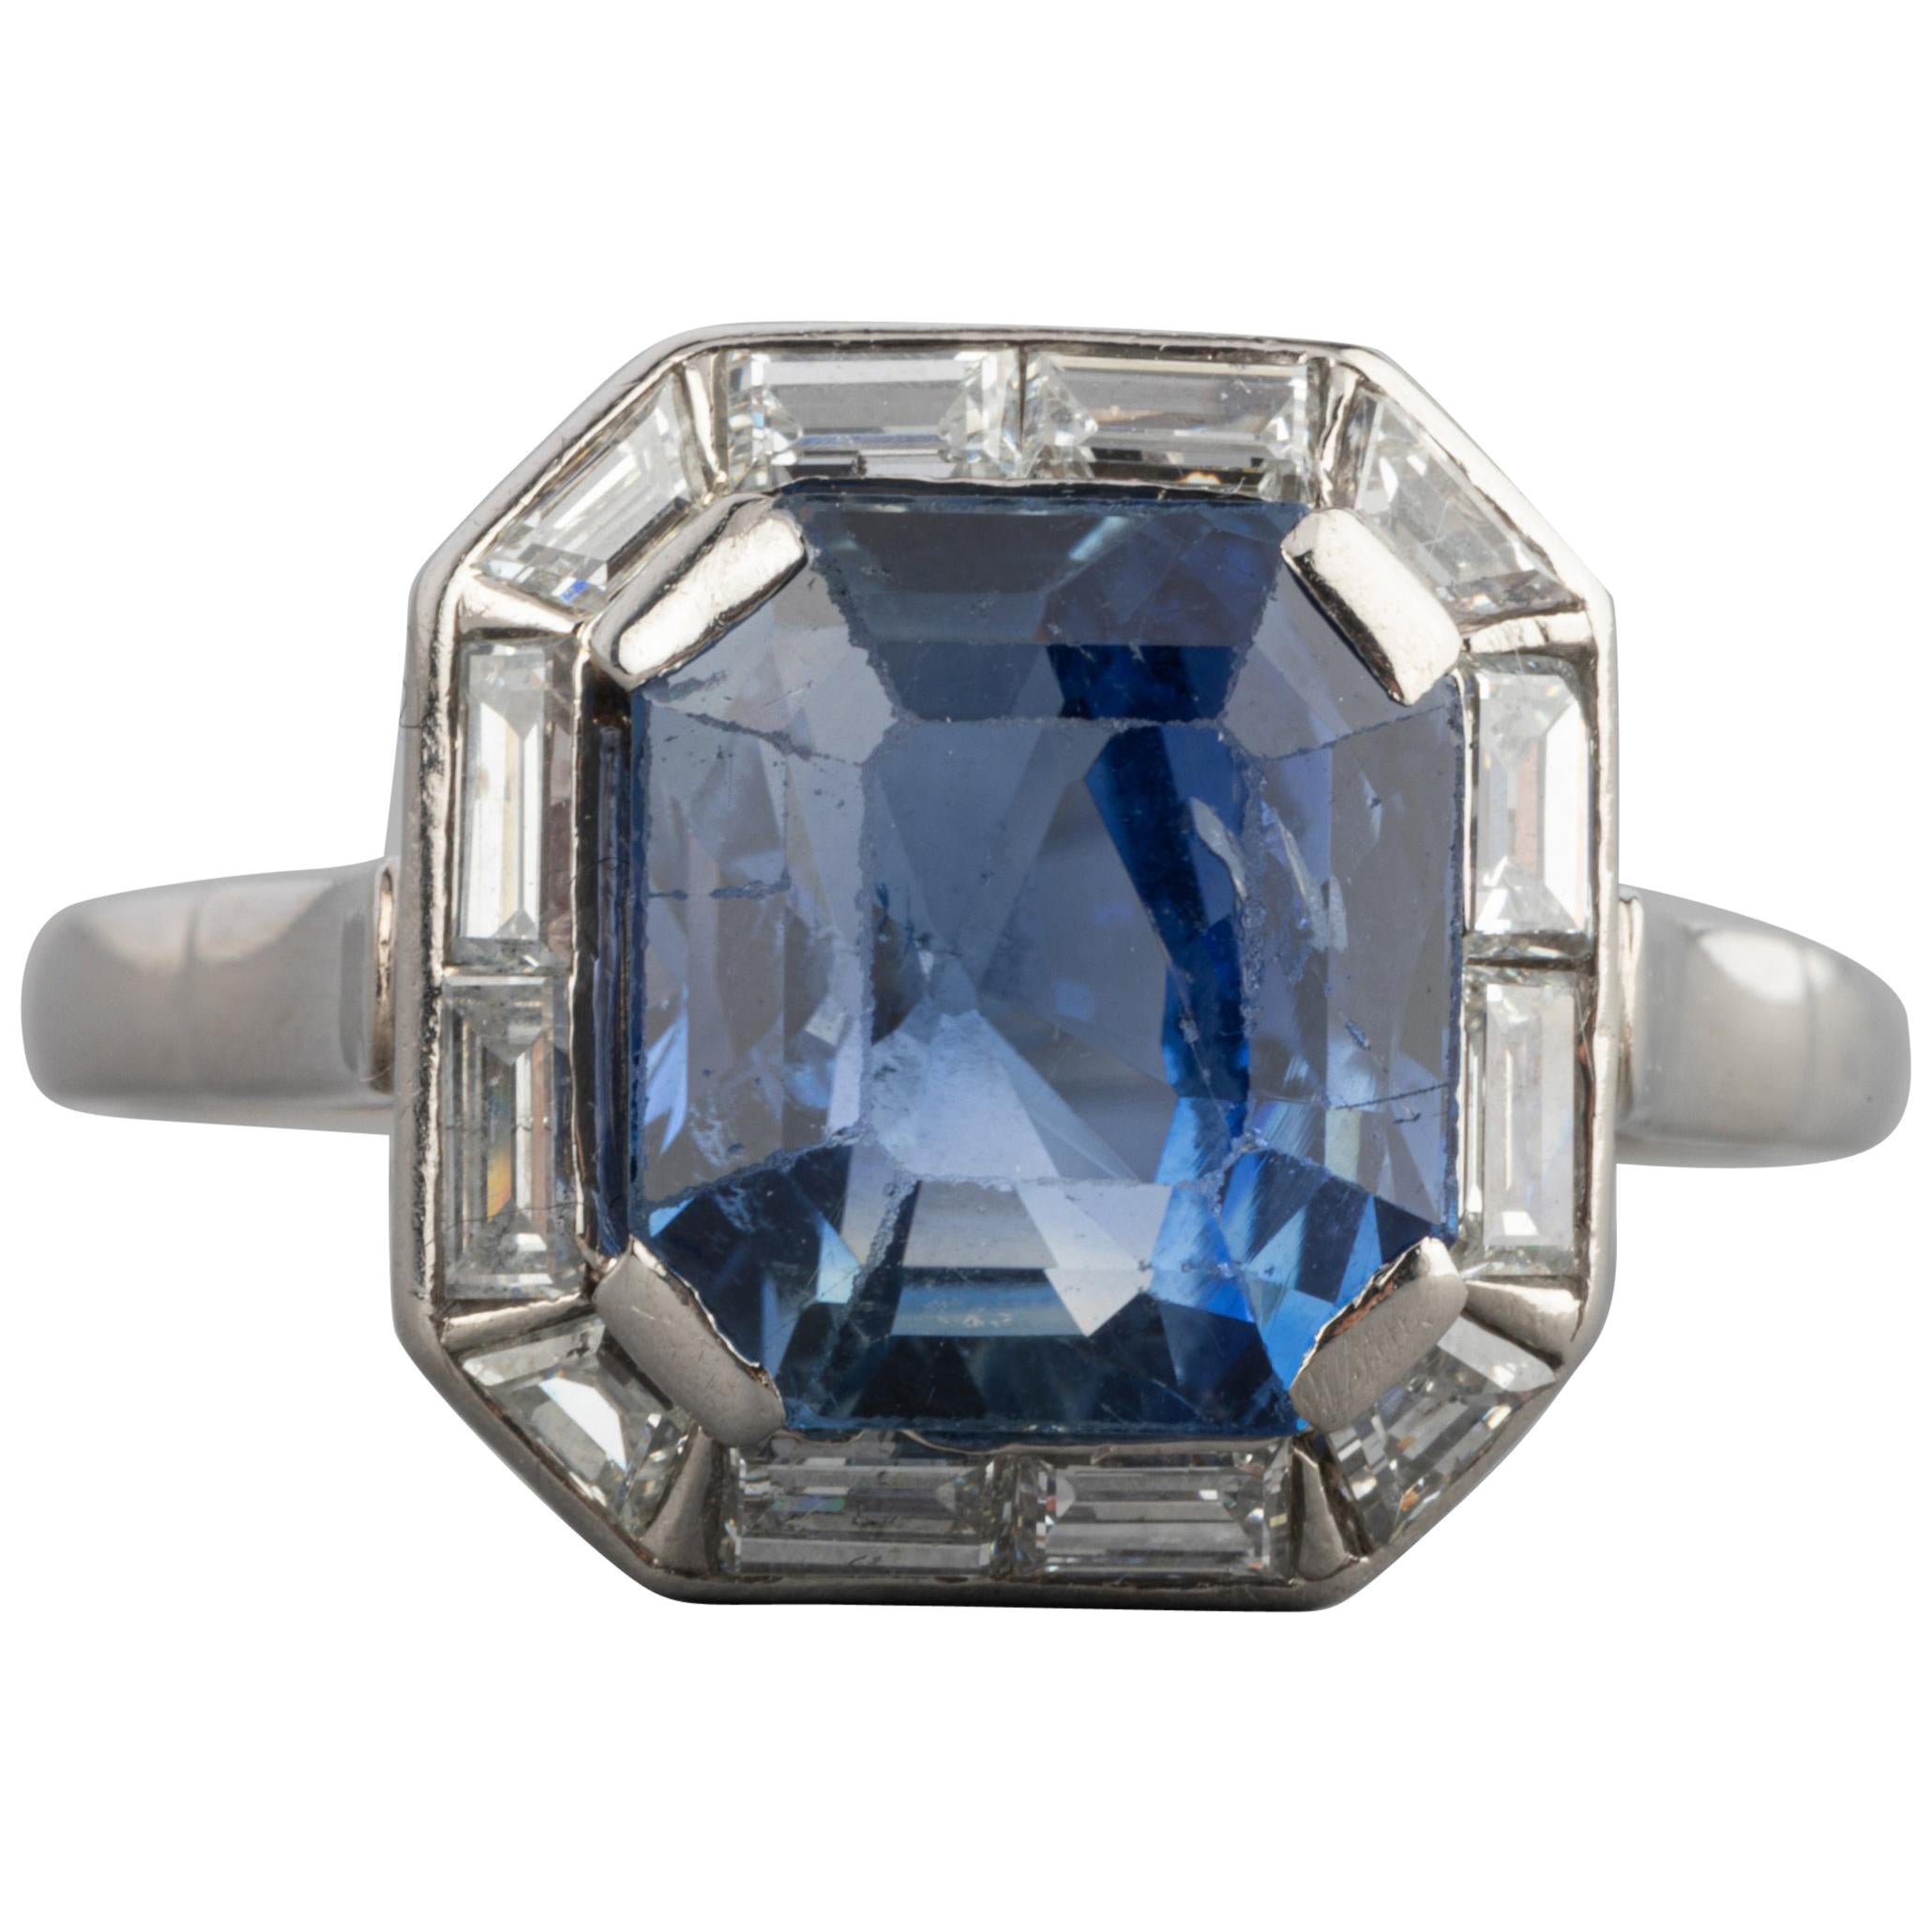 4 Carat Sapphire and Diamonds French Art Deco Ring